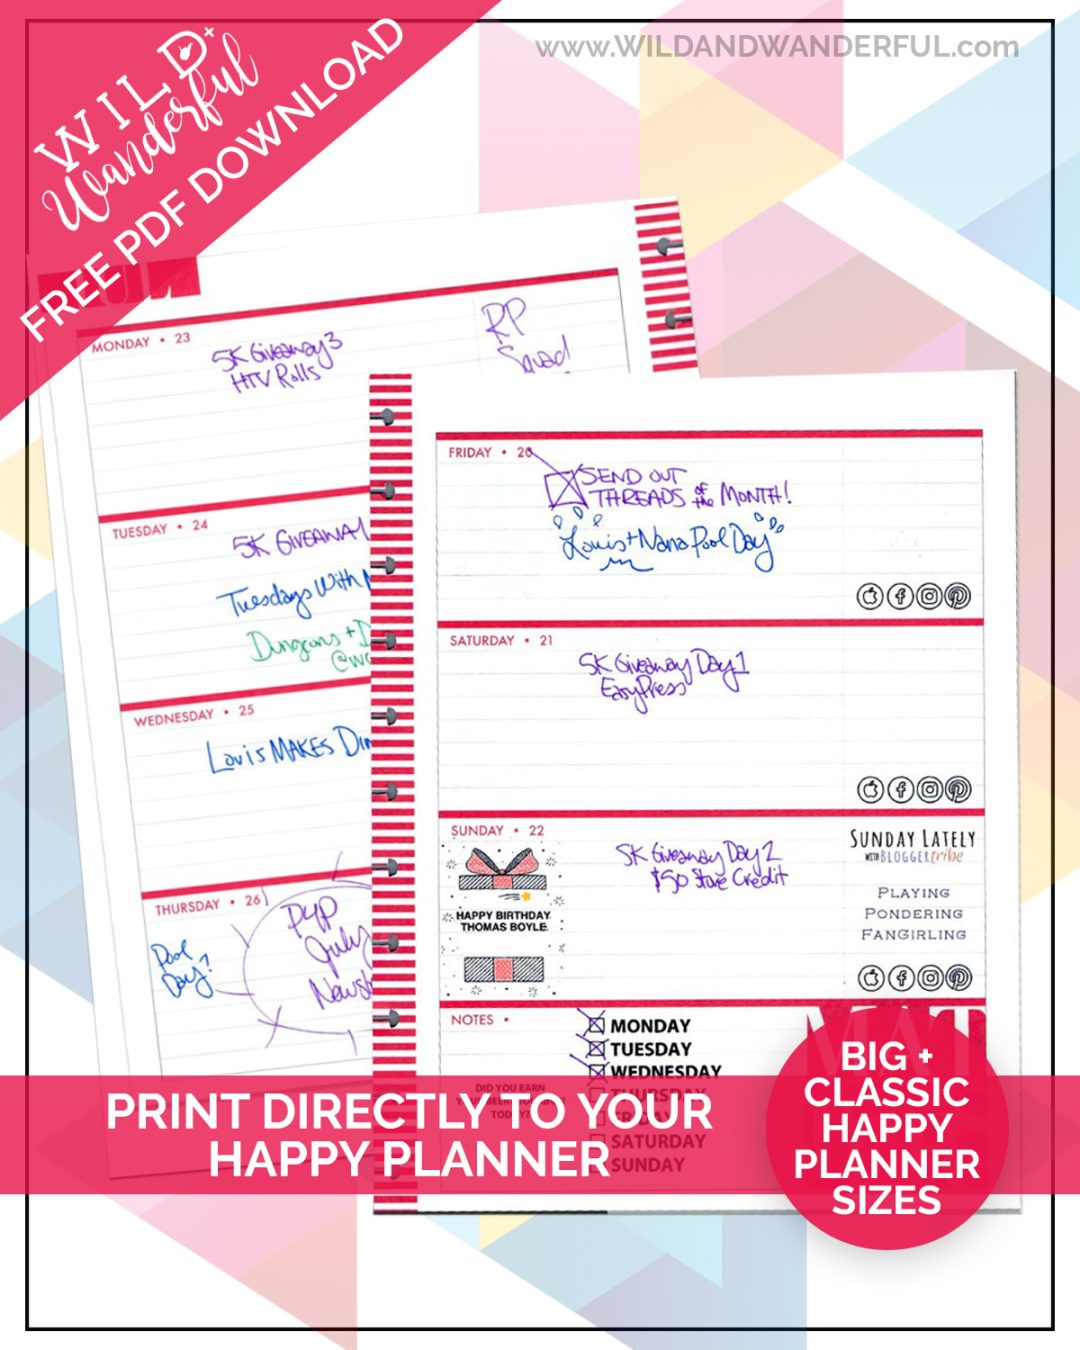 Print Directly on Your Happy Planner + FREE PDF Files!